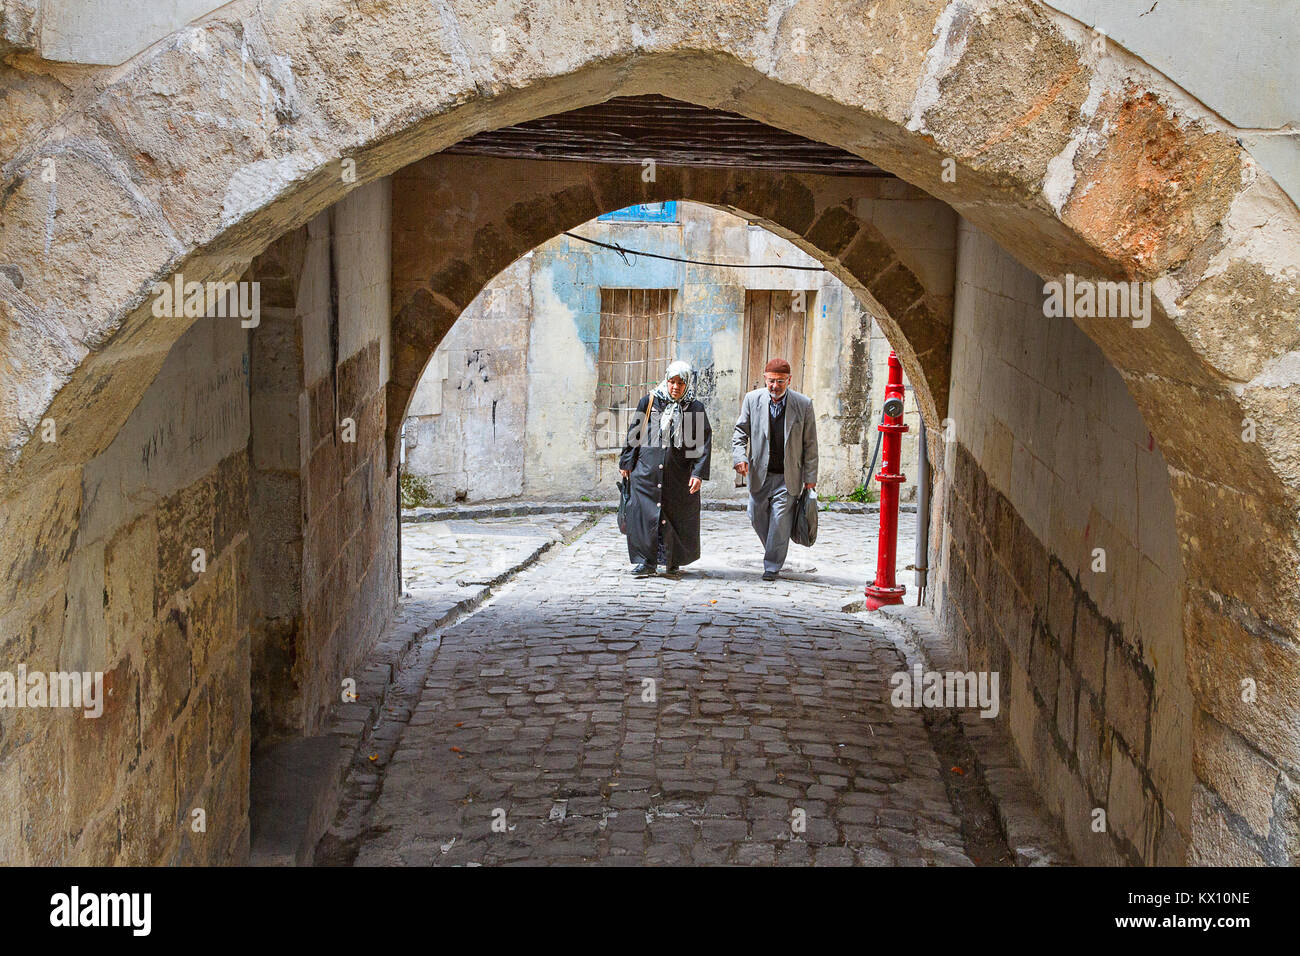 Elderly couple walking in the old narrow street with an archway, in Gaziantep, Turkey. Stock Photo